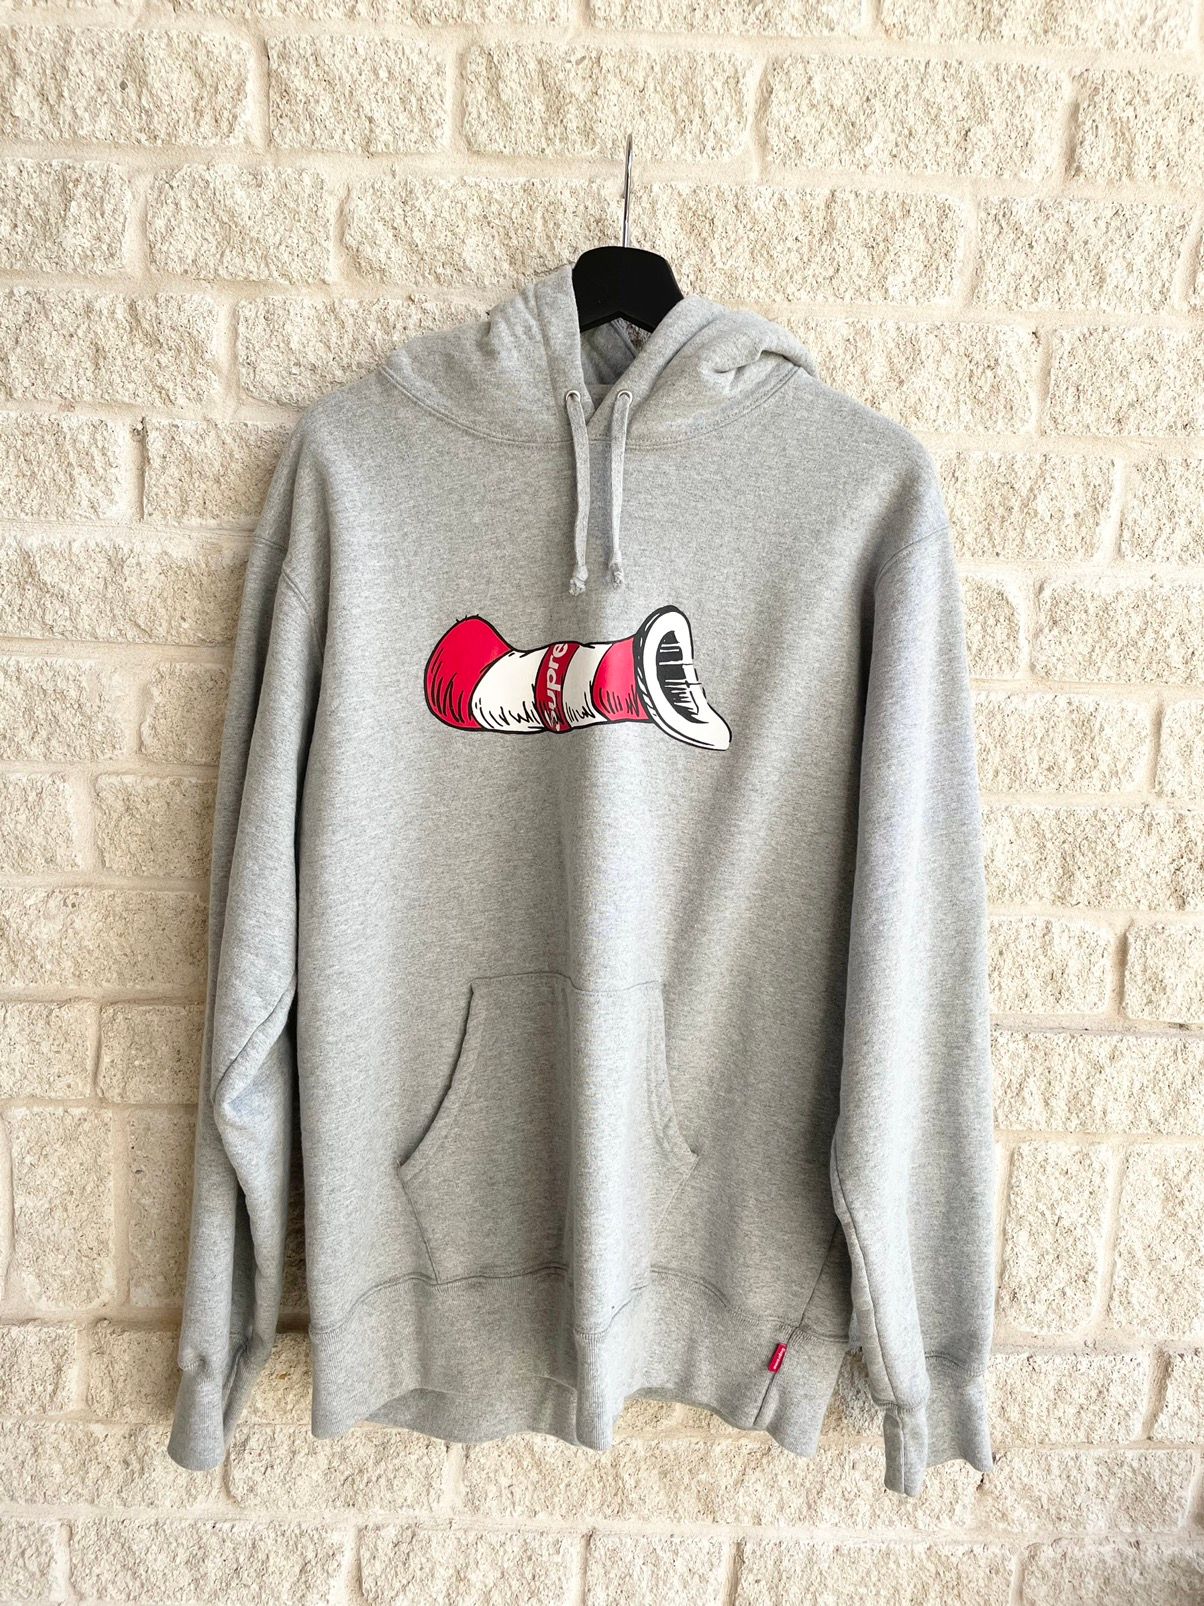 Supreme Supreme Cat in the Hat Hoodie Grey FW18 | Grailed